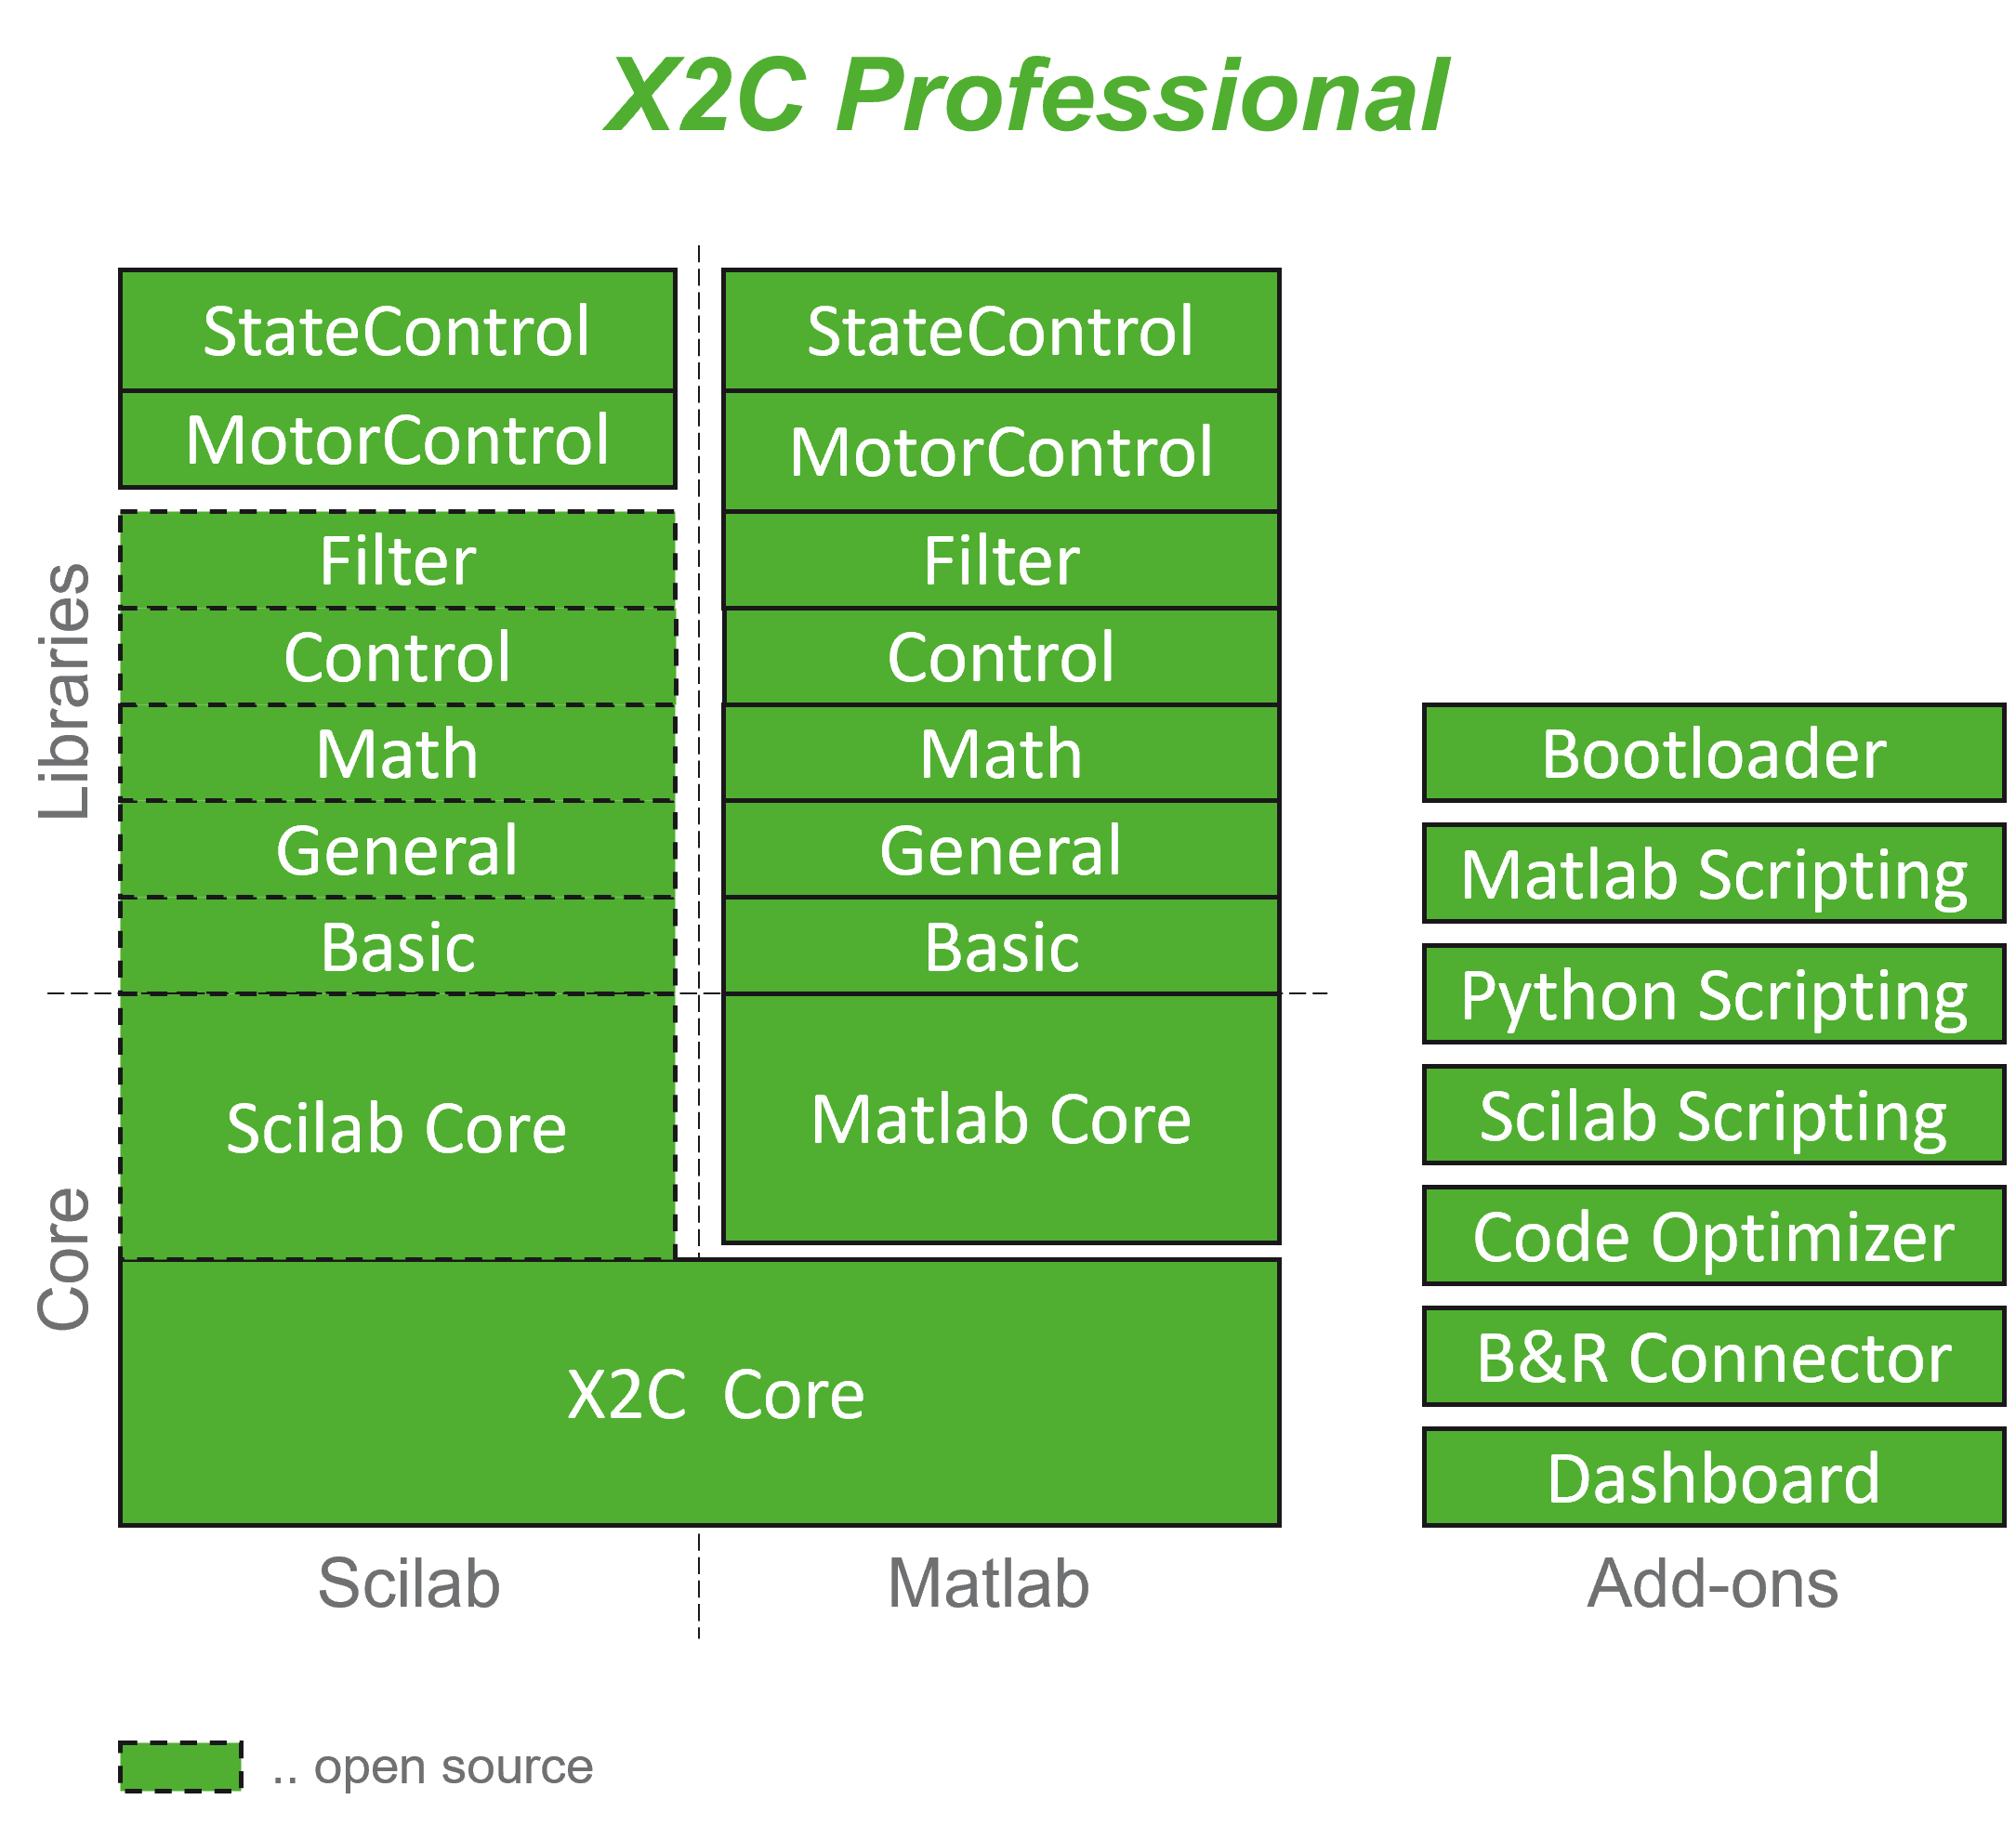 X2C Professional content overview